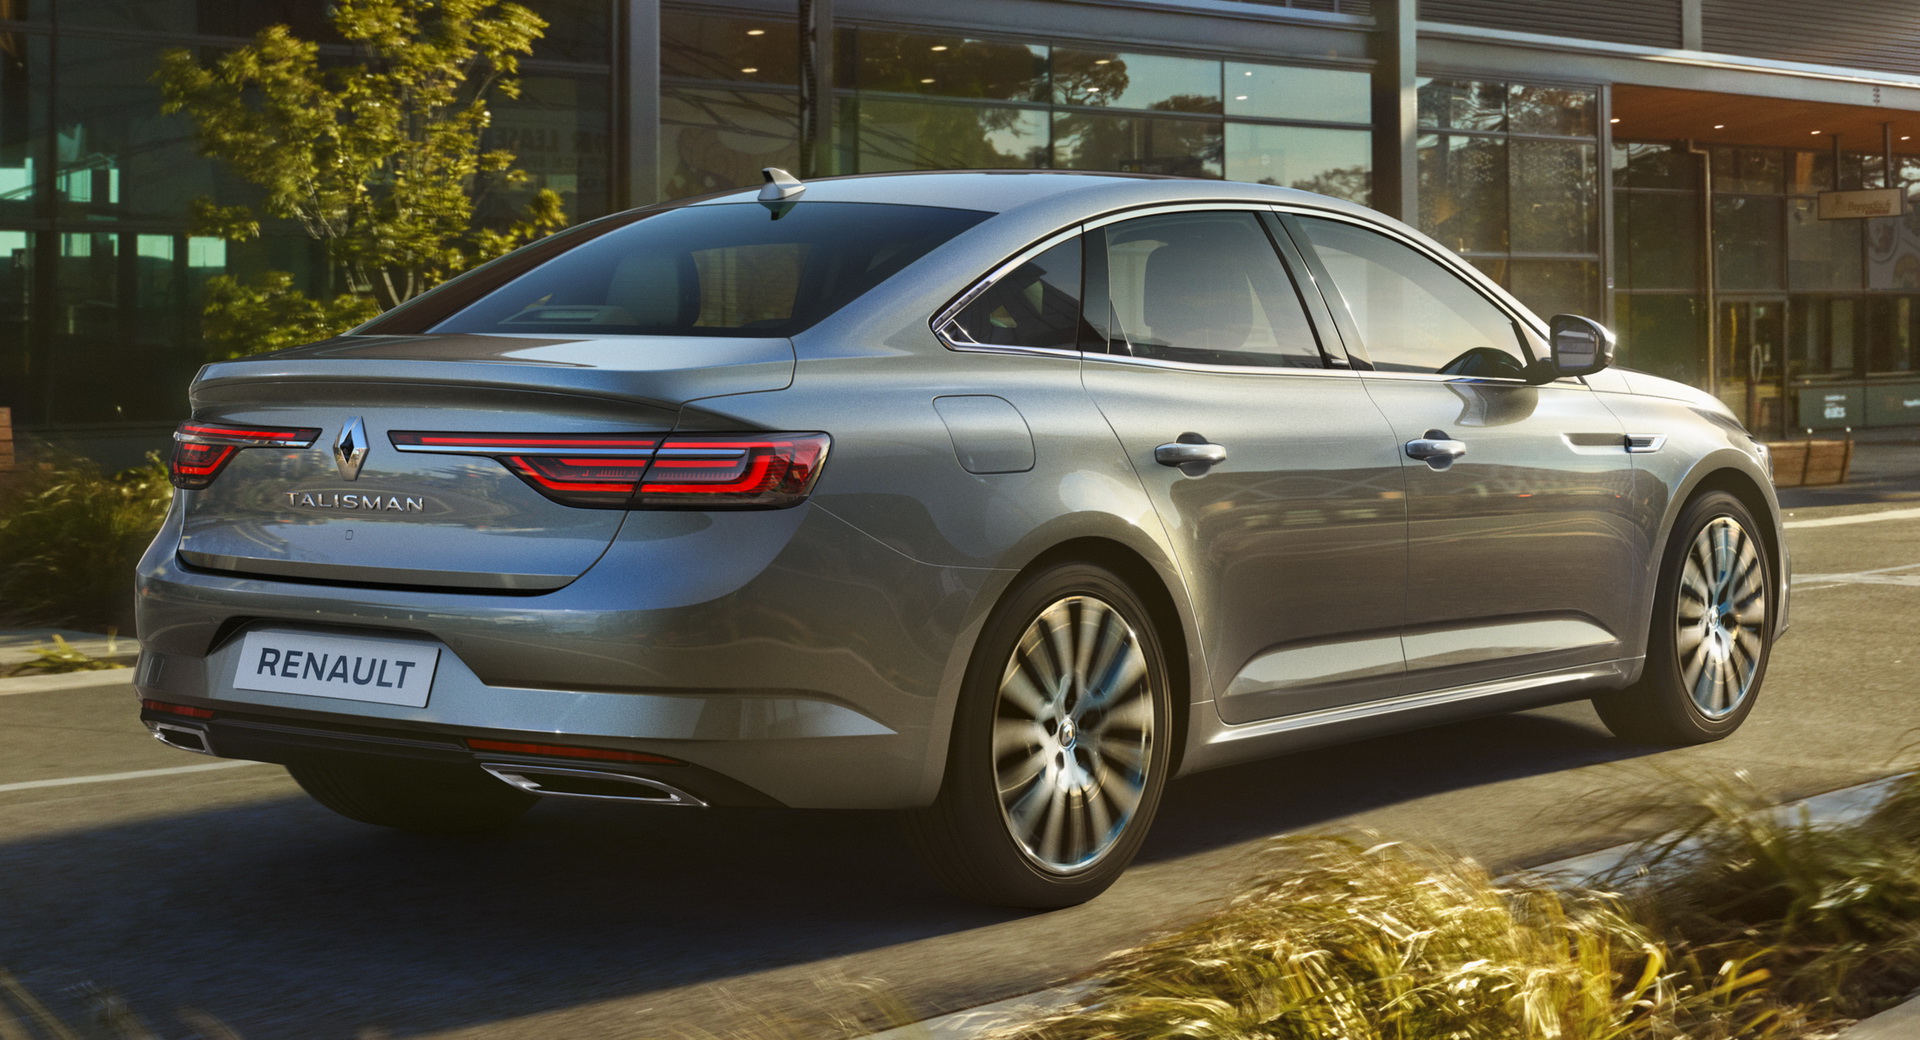 2020 Renault Talisman Goes Official With An Improved Cabin, More